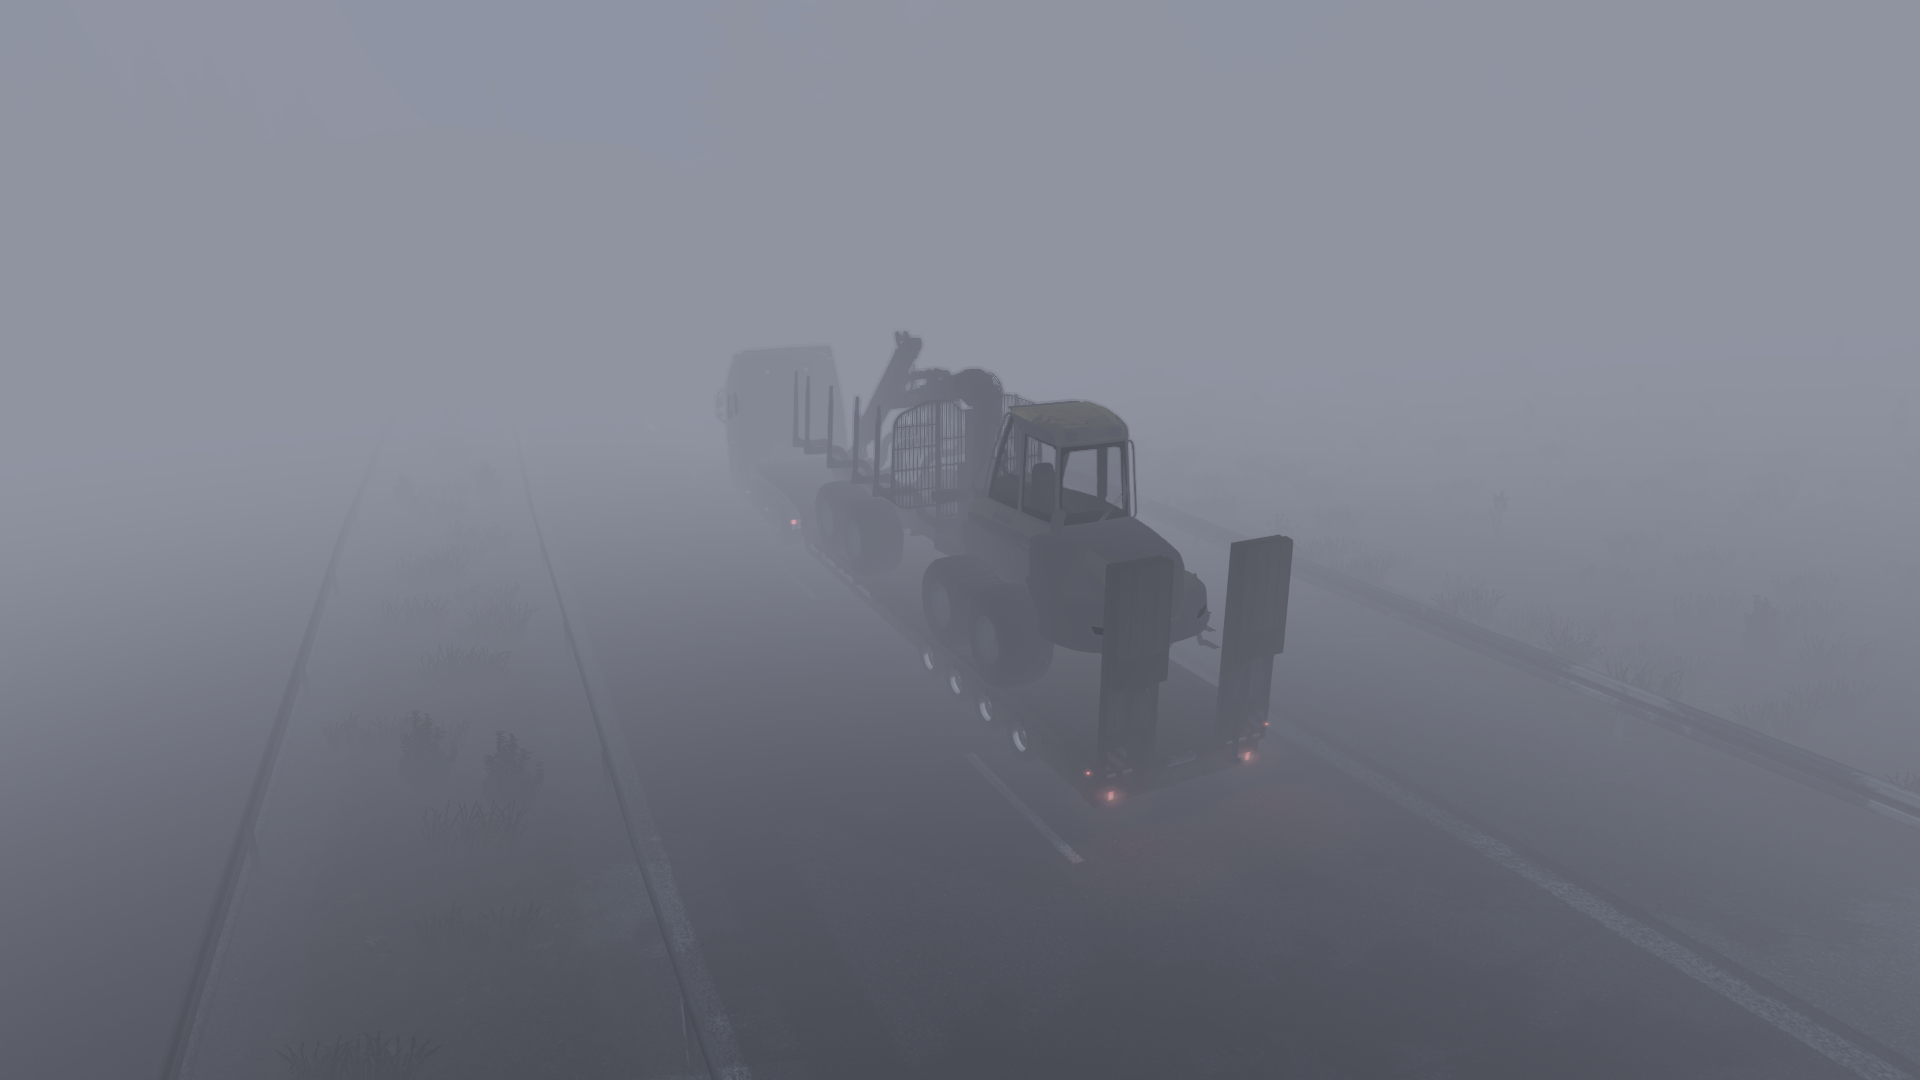 ets2_00070.png